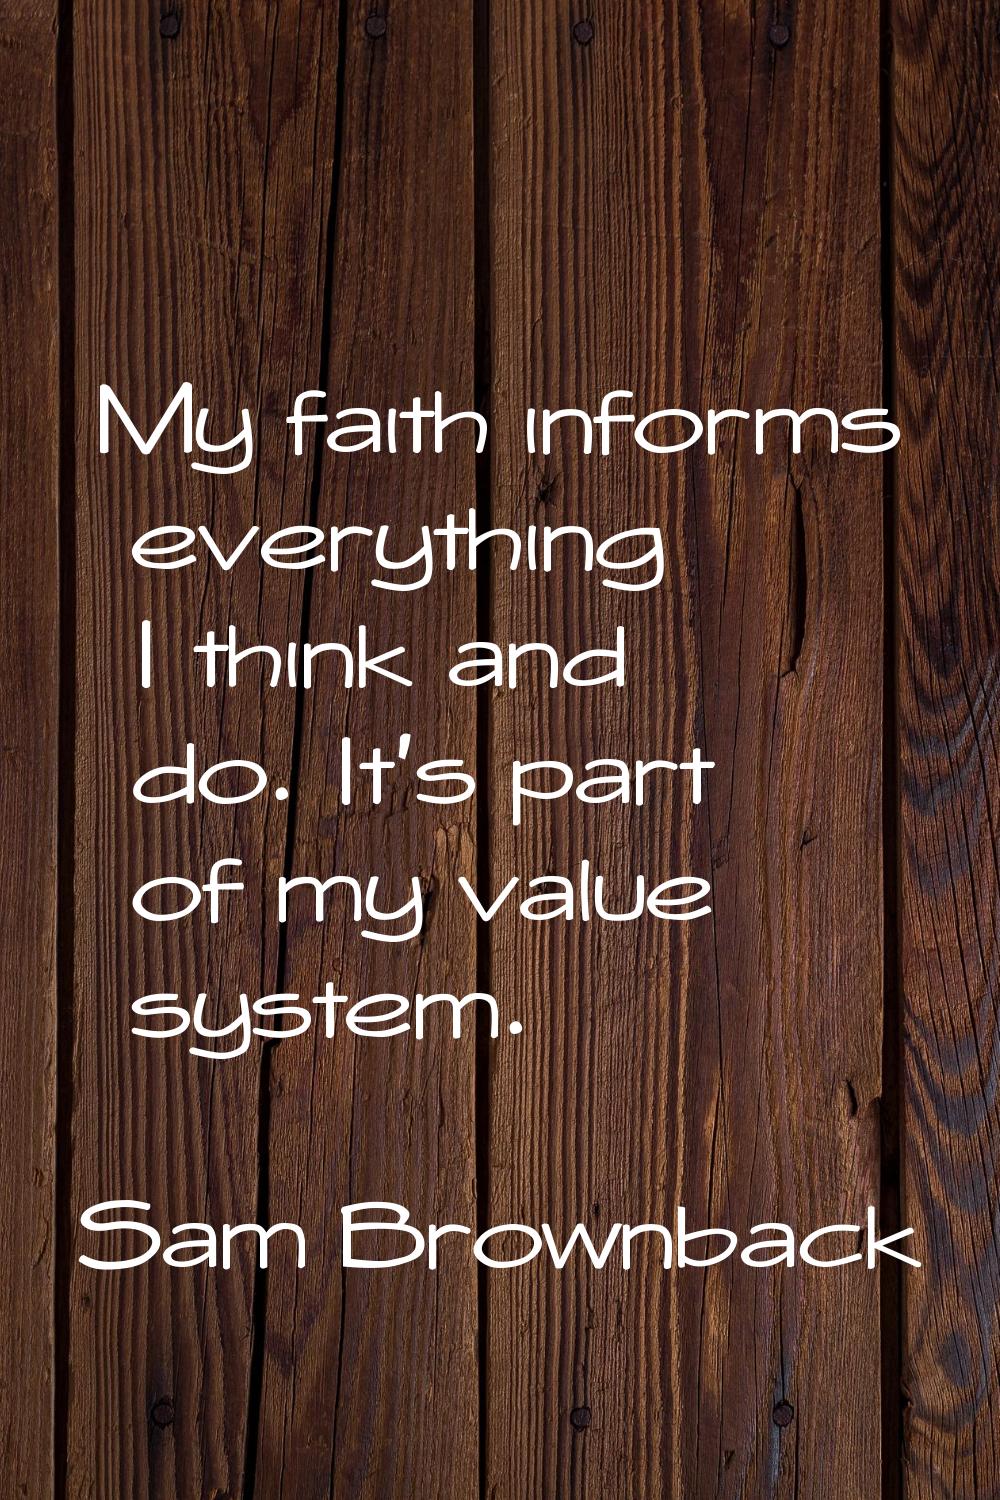 My faith informs everything I think and do. It's part of my value system.